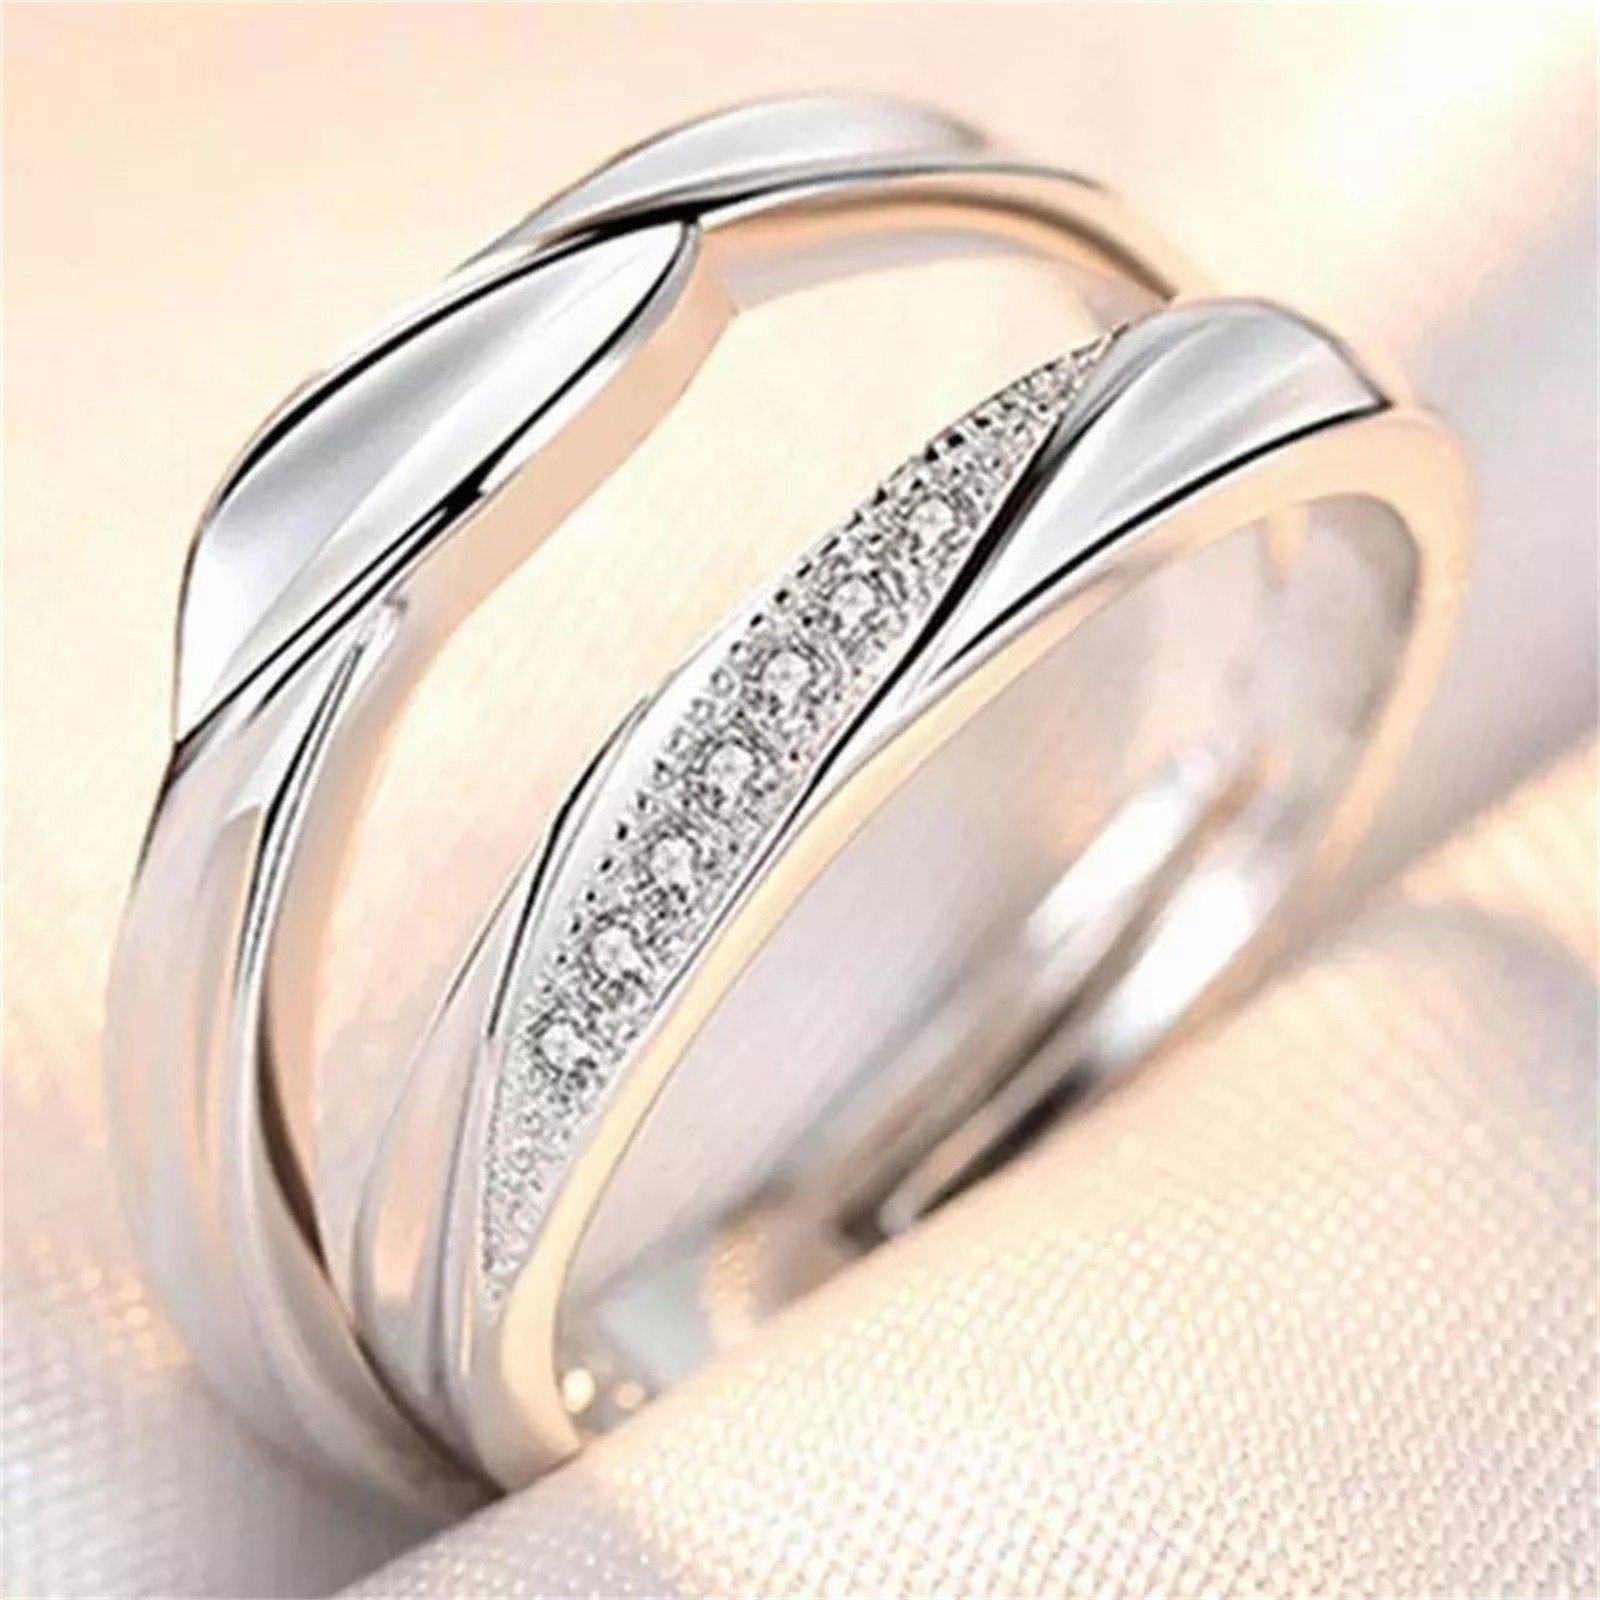 Buy University Trendz Gold Plated Promise Band Couple Rings for Lovers  Valentine Gift Sets for Men and Women at Amazon.in